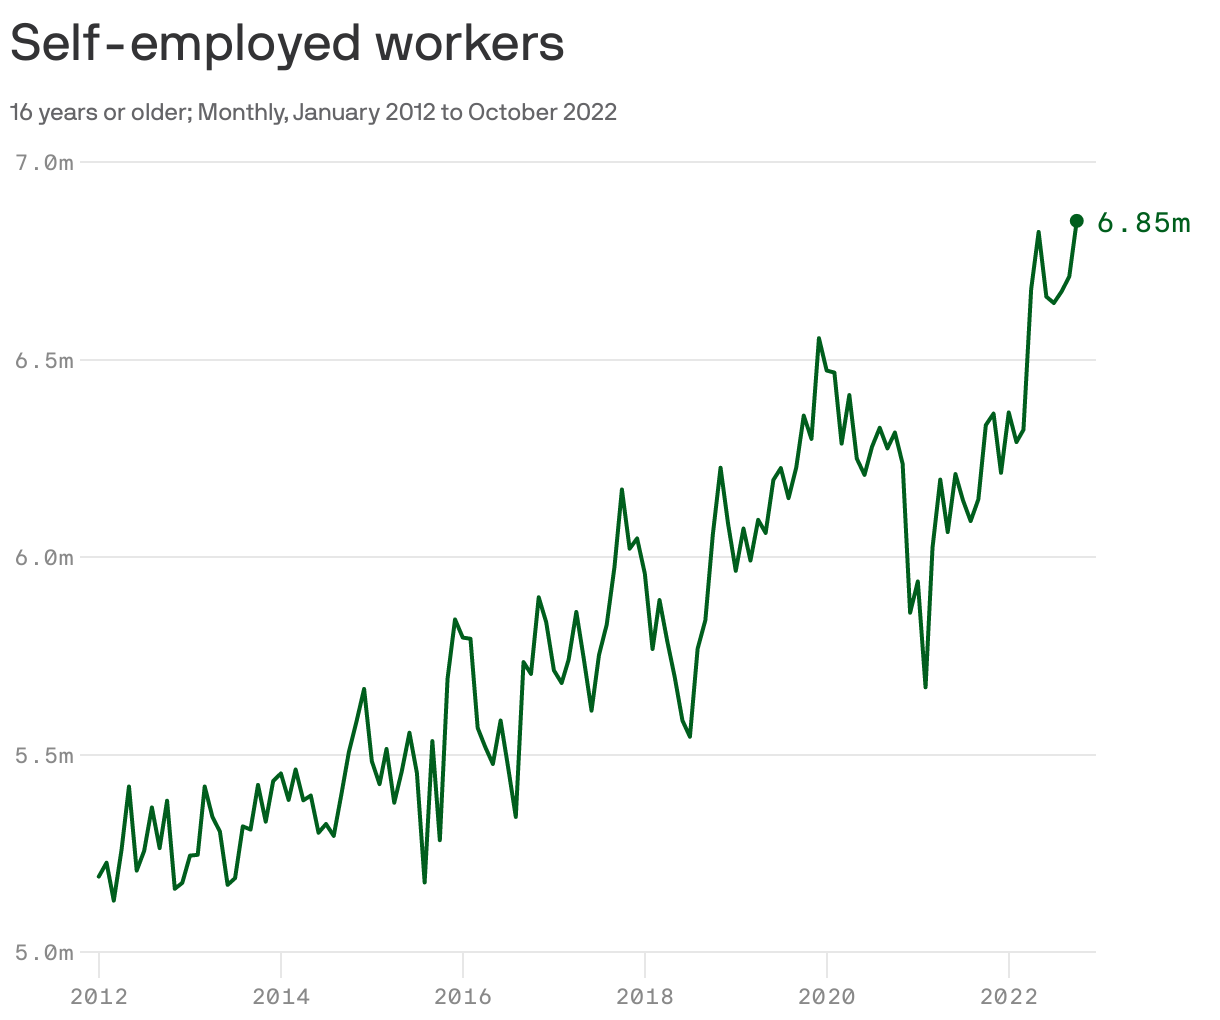 Self-employed workers